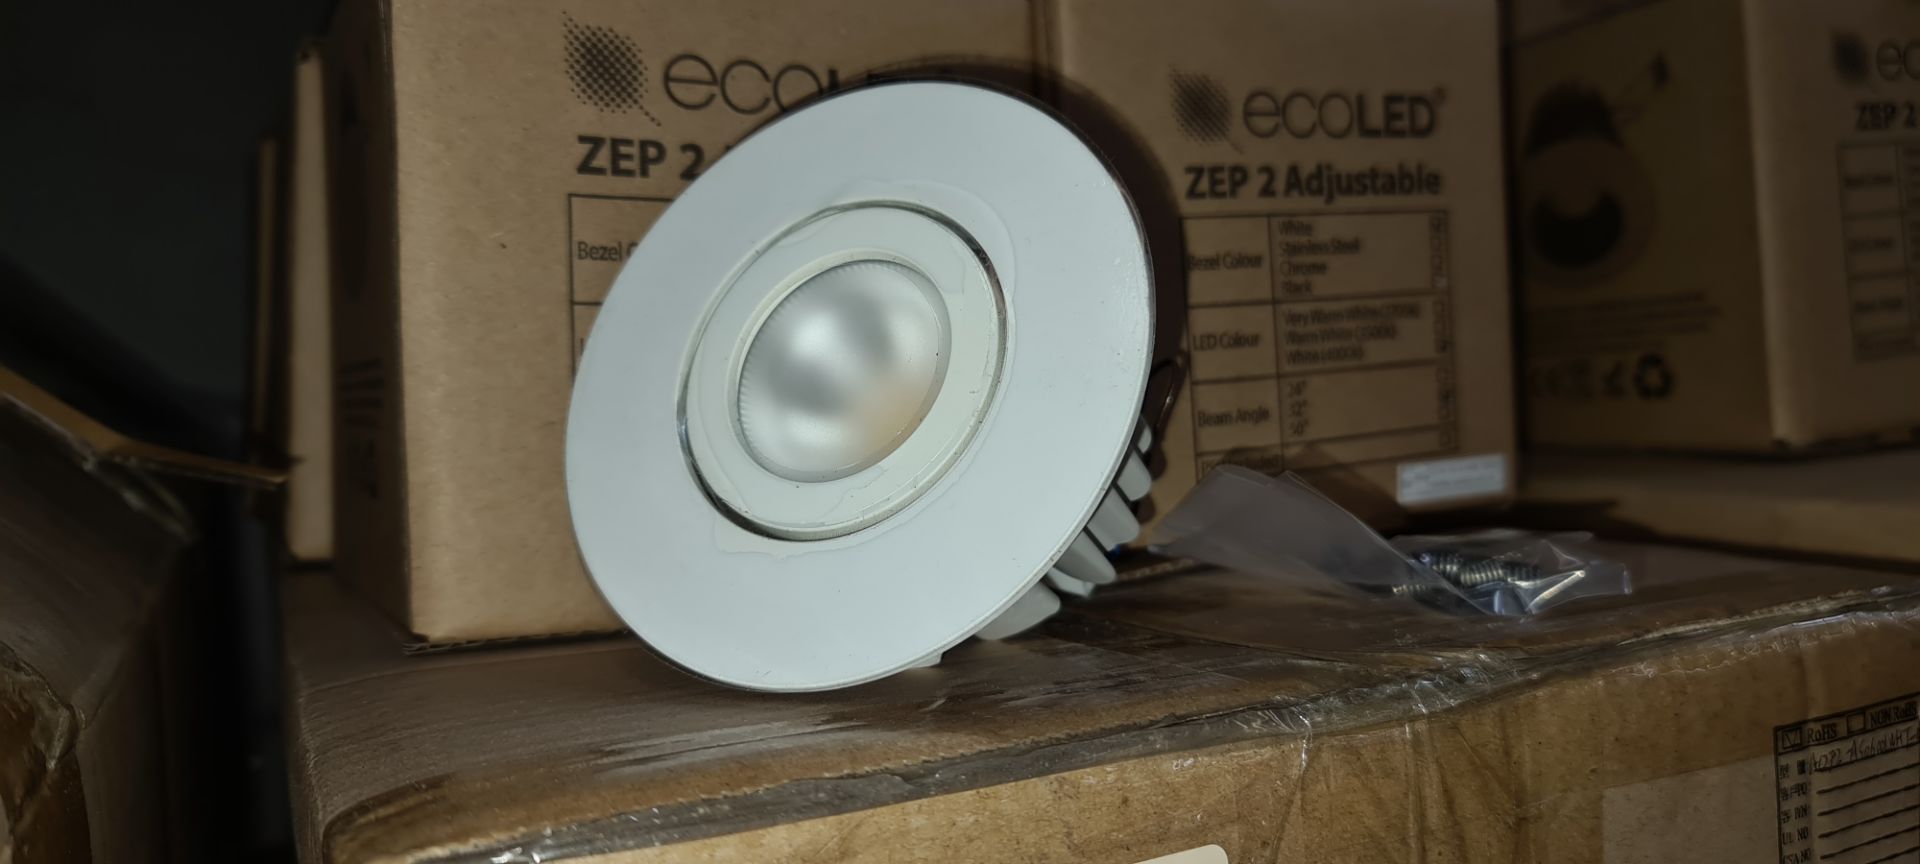 26 off EcoLED ZEP2 fixed white downlights, 4000K, model Z2-F-W-10-40-80-45-D4 - 2 boxes & 6 individu - Image 5 of 10